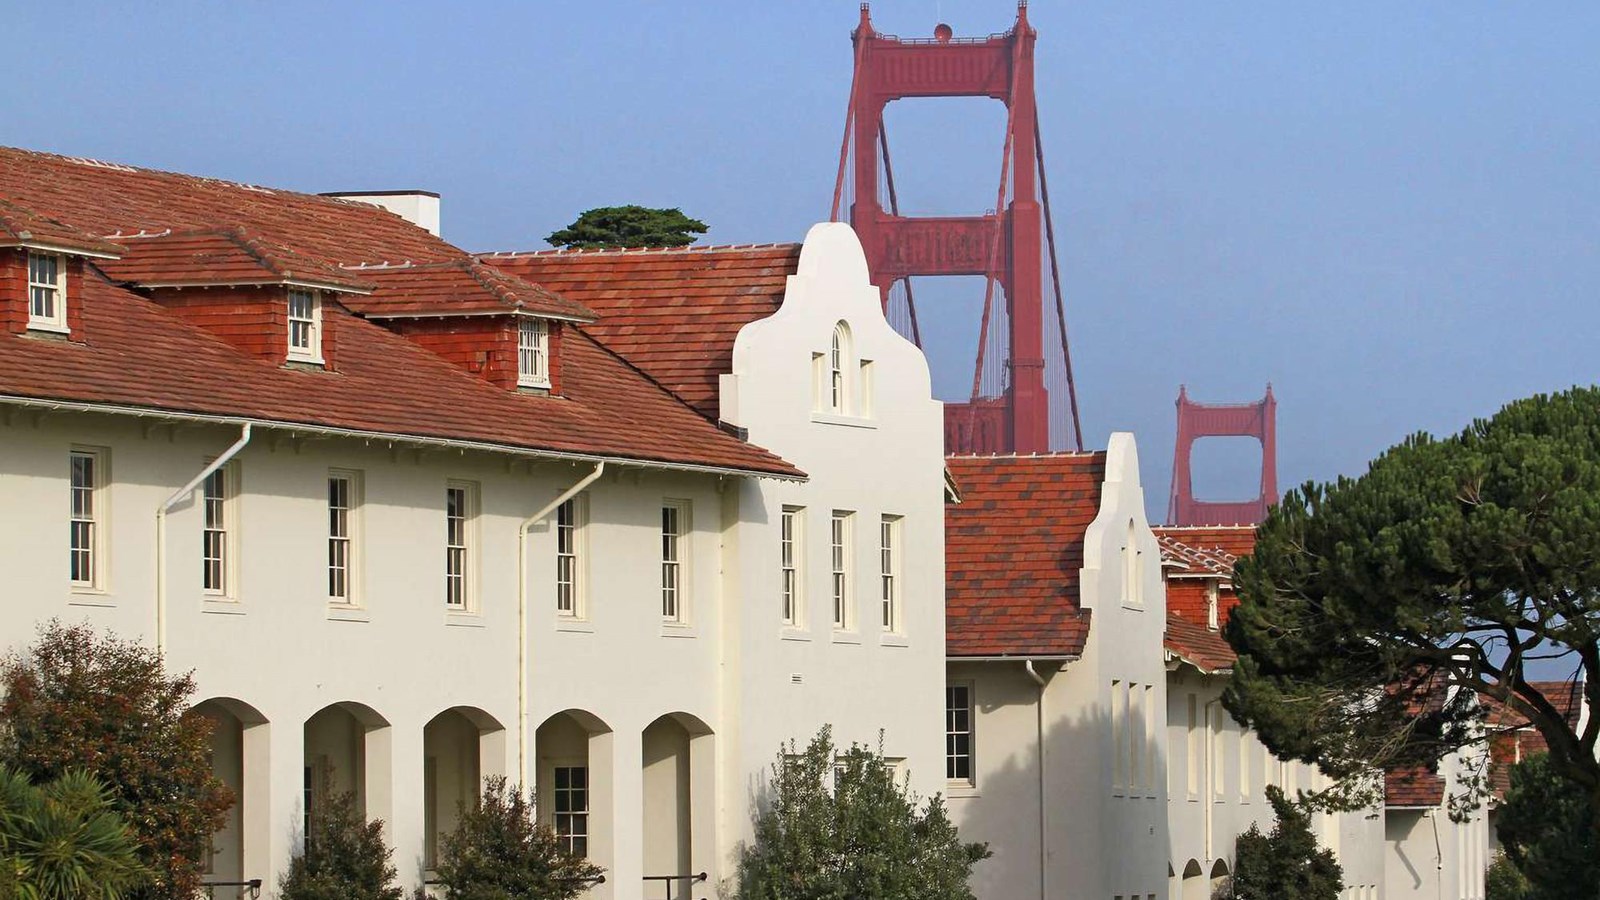 Mission revival style buildings of Fort Scott with the Golden Gate Bridge in the background.